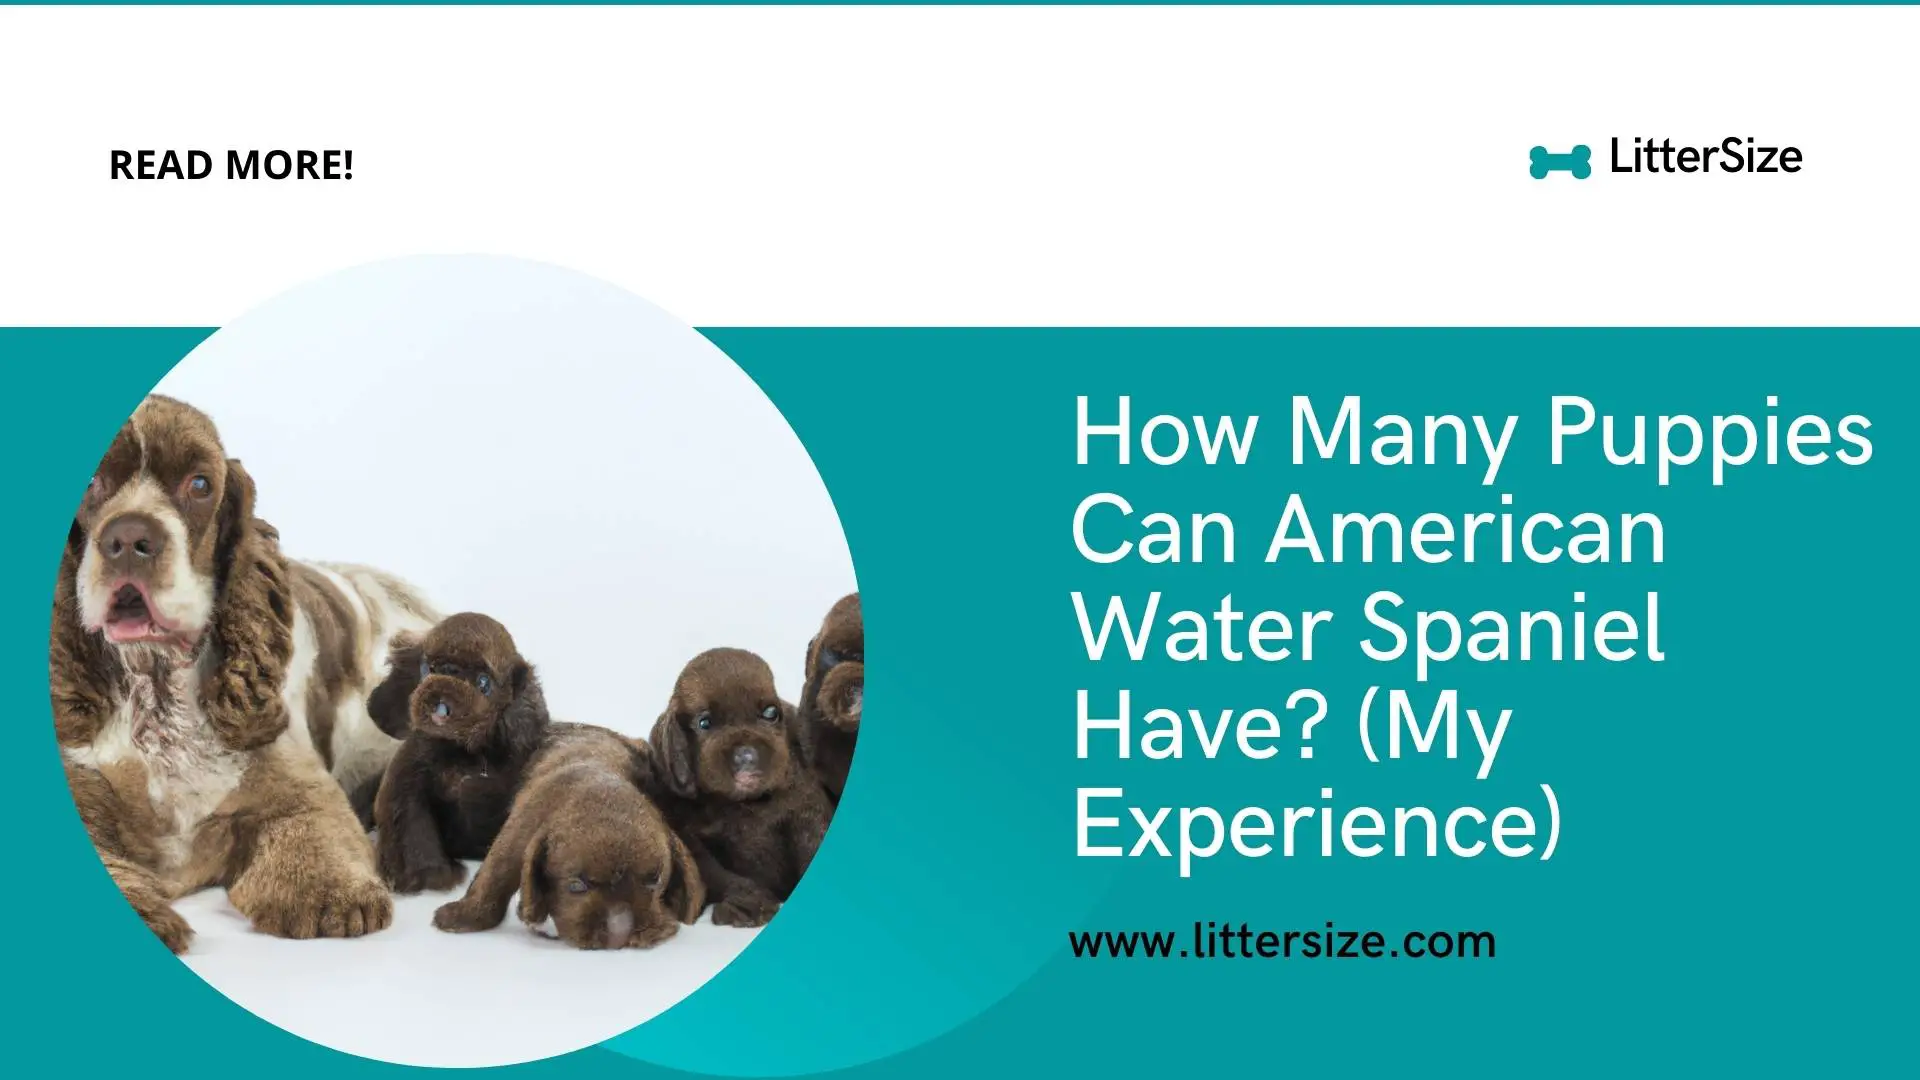 How Many Puppies Can American Water Spaniel Have? (My Experience)